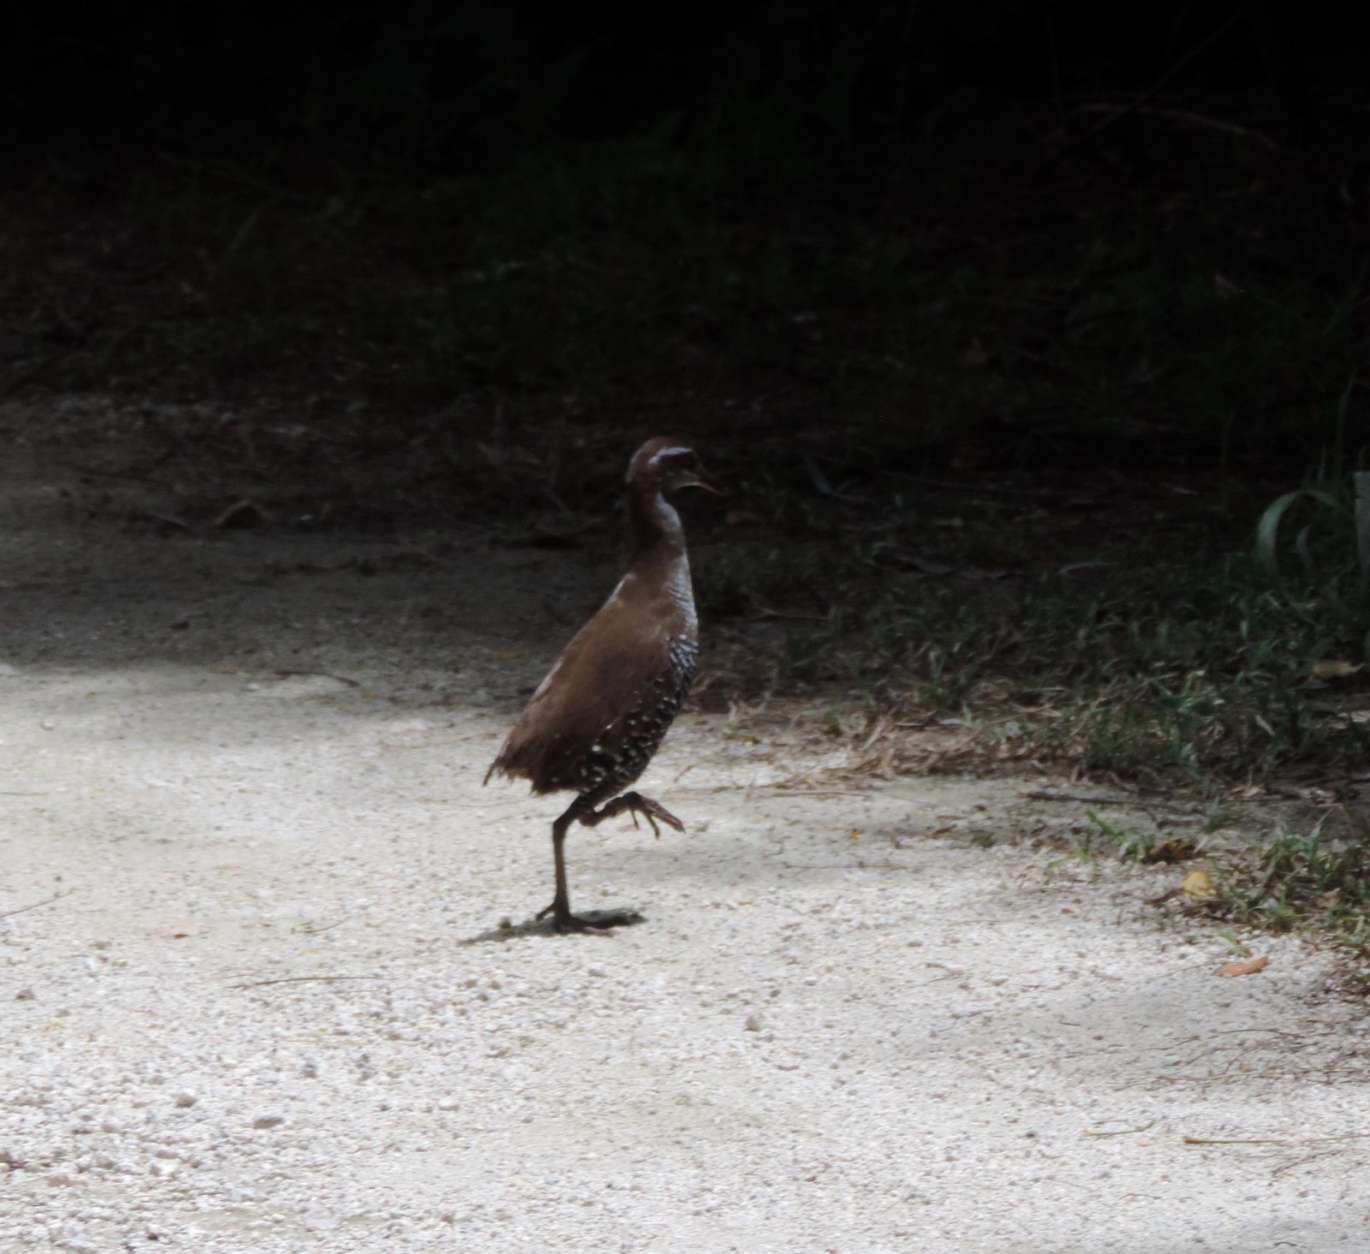 One of the 49 Guam rails released to the wild on Rota by the Guam Department of Aquatic and Wildlife Resources and the Smithsonian Conservation Biology Institute. (Courtesy of the Smithsonian Conservation Biology Institute)